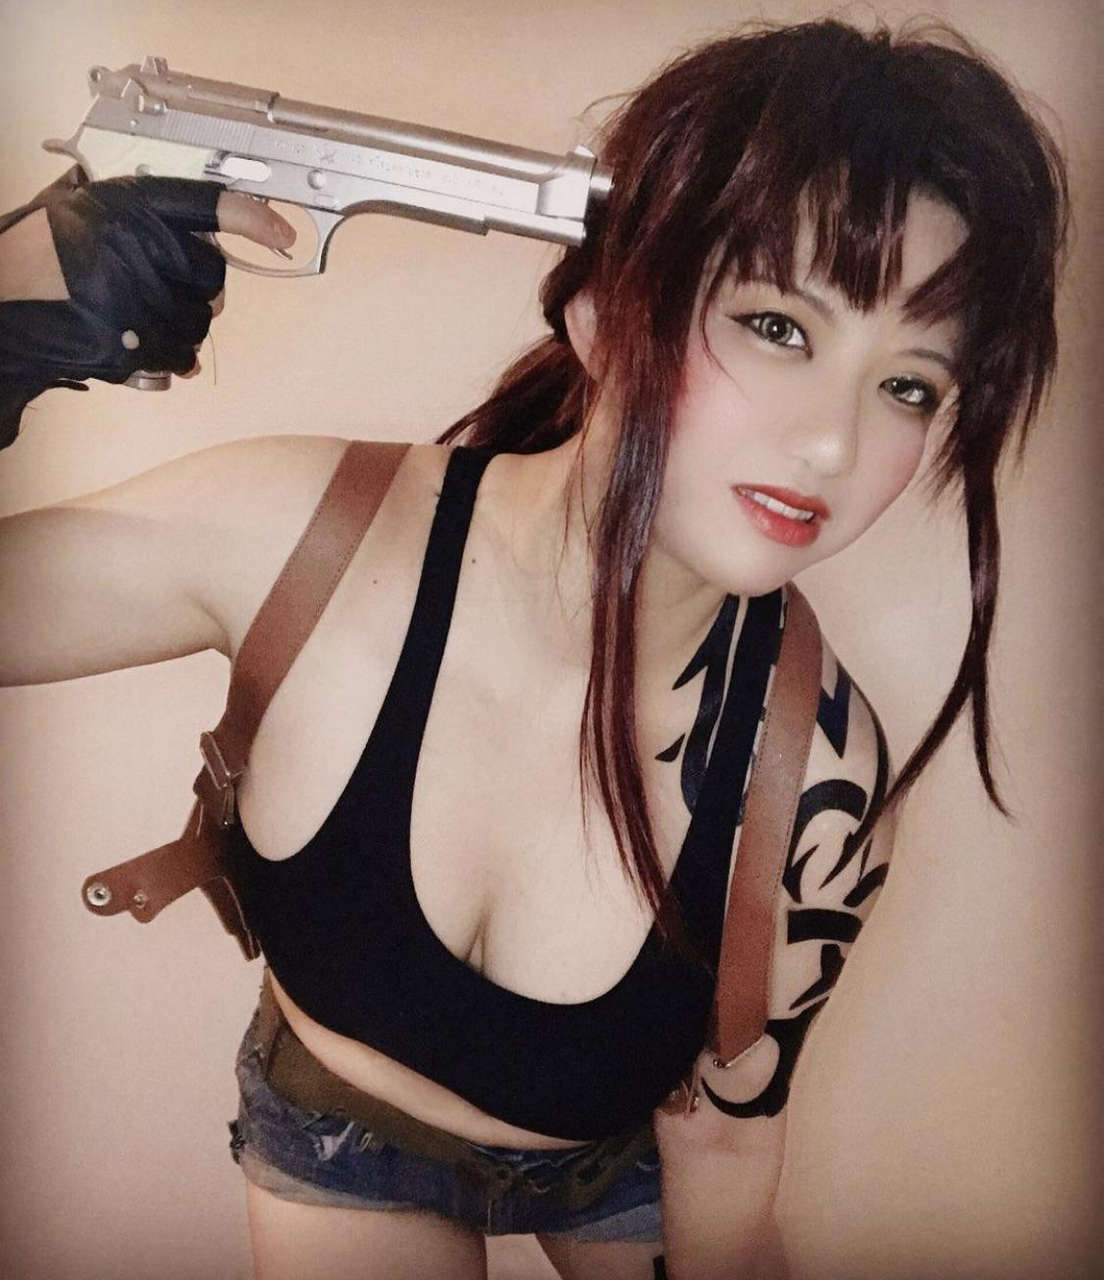 Revy From Black Lagoon Cosplay Done By Rye Cosplaying On Instagram